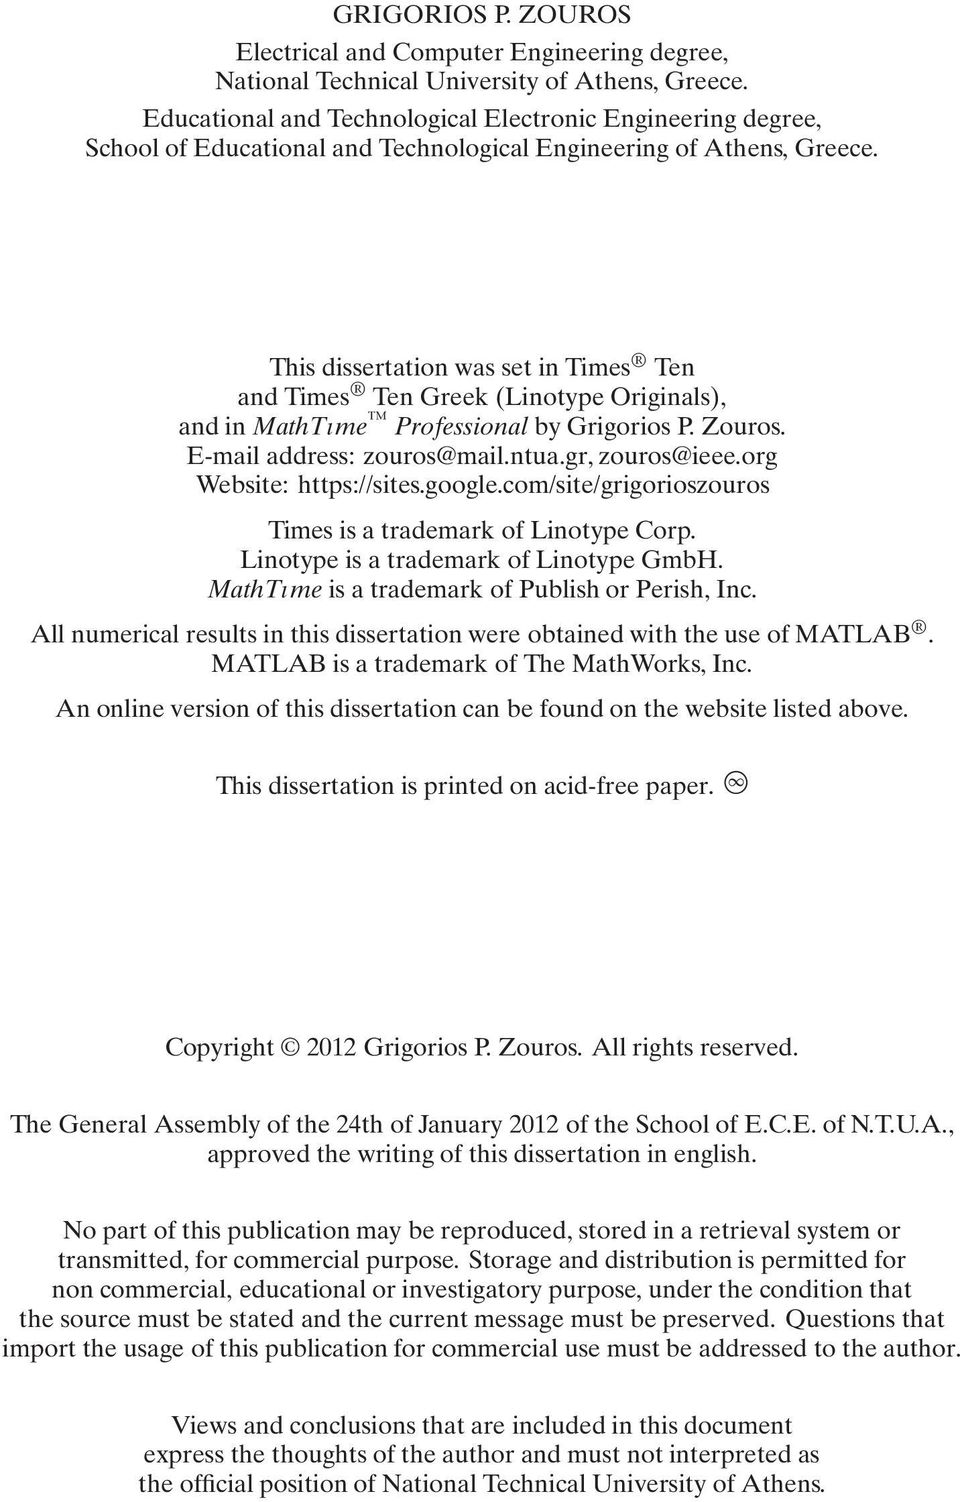 This dissertation was set in Times Ten and Times Ten Greek (Linotype Originals), and in MathT{me Professional by Grigorios P. Zouros. E-mail address: zouros@mail.ntua.gr, zouros@ieee.